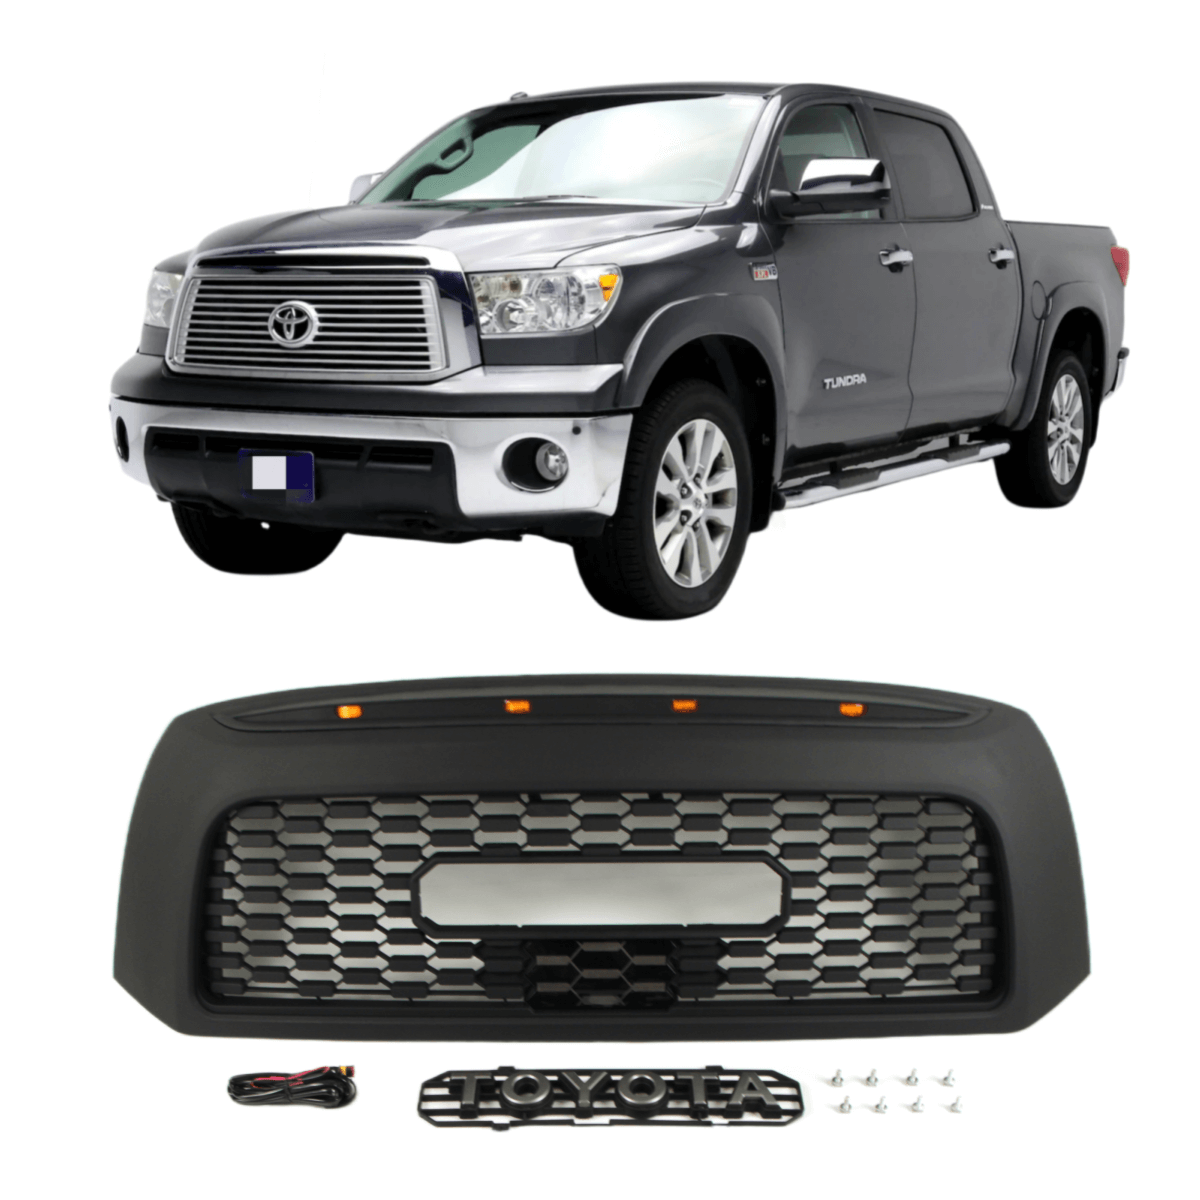 {WildWell}{Toyota Grill}-{Toyota Tundra Grille 2007-2013/5}-front